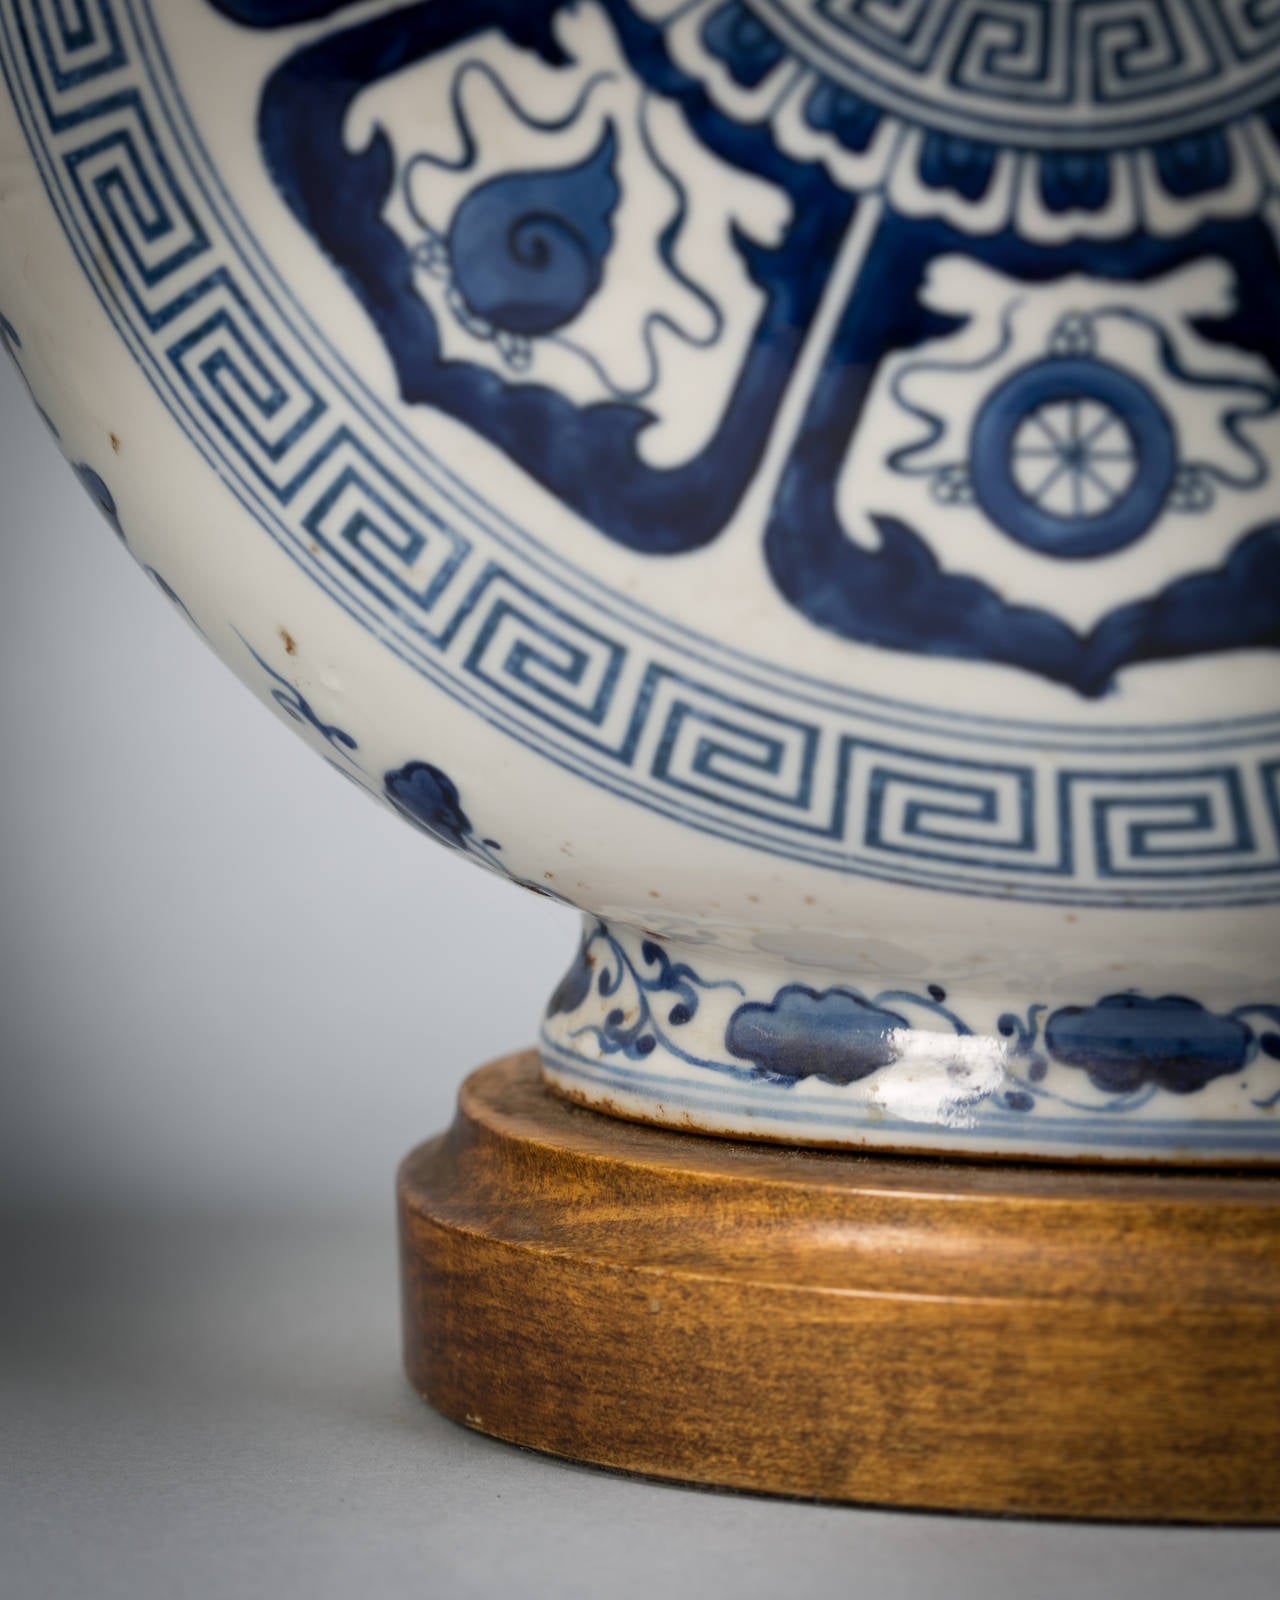 blue and white china lamps